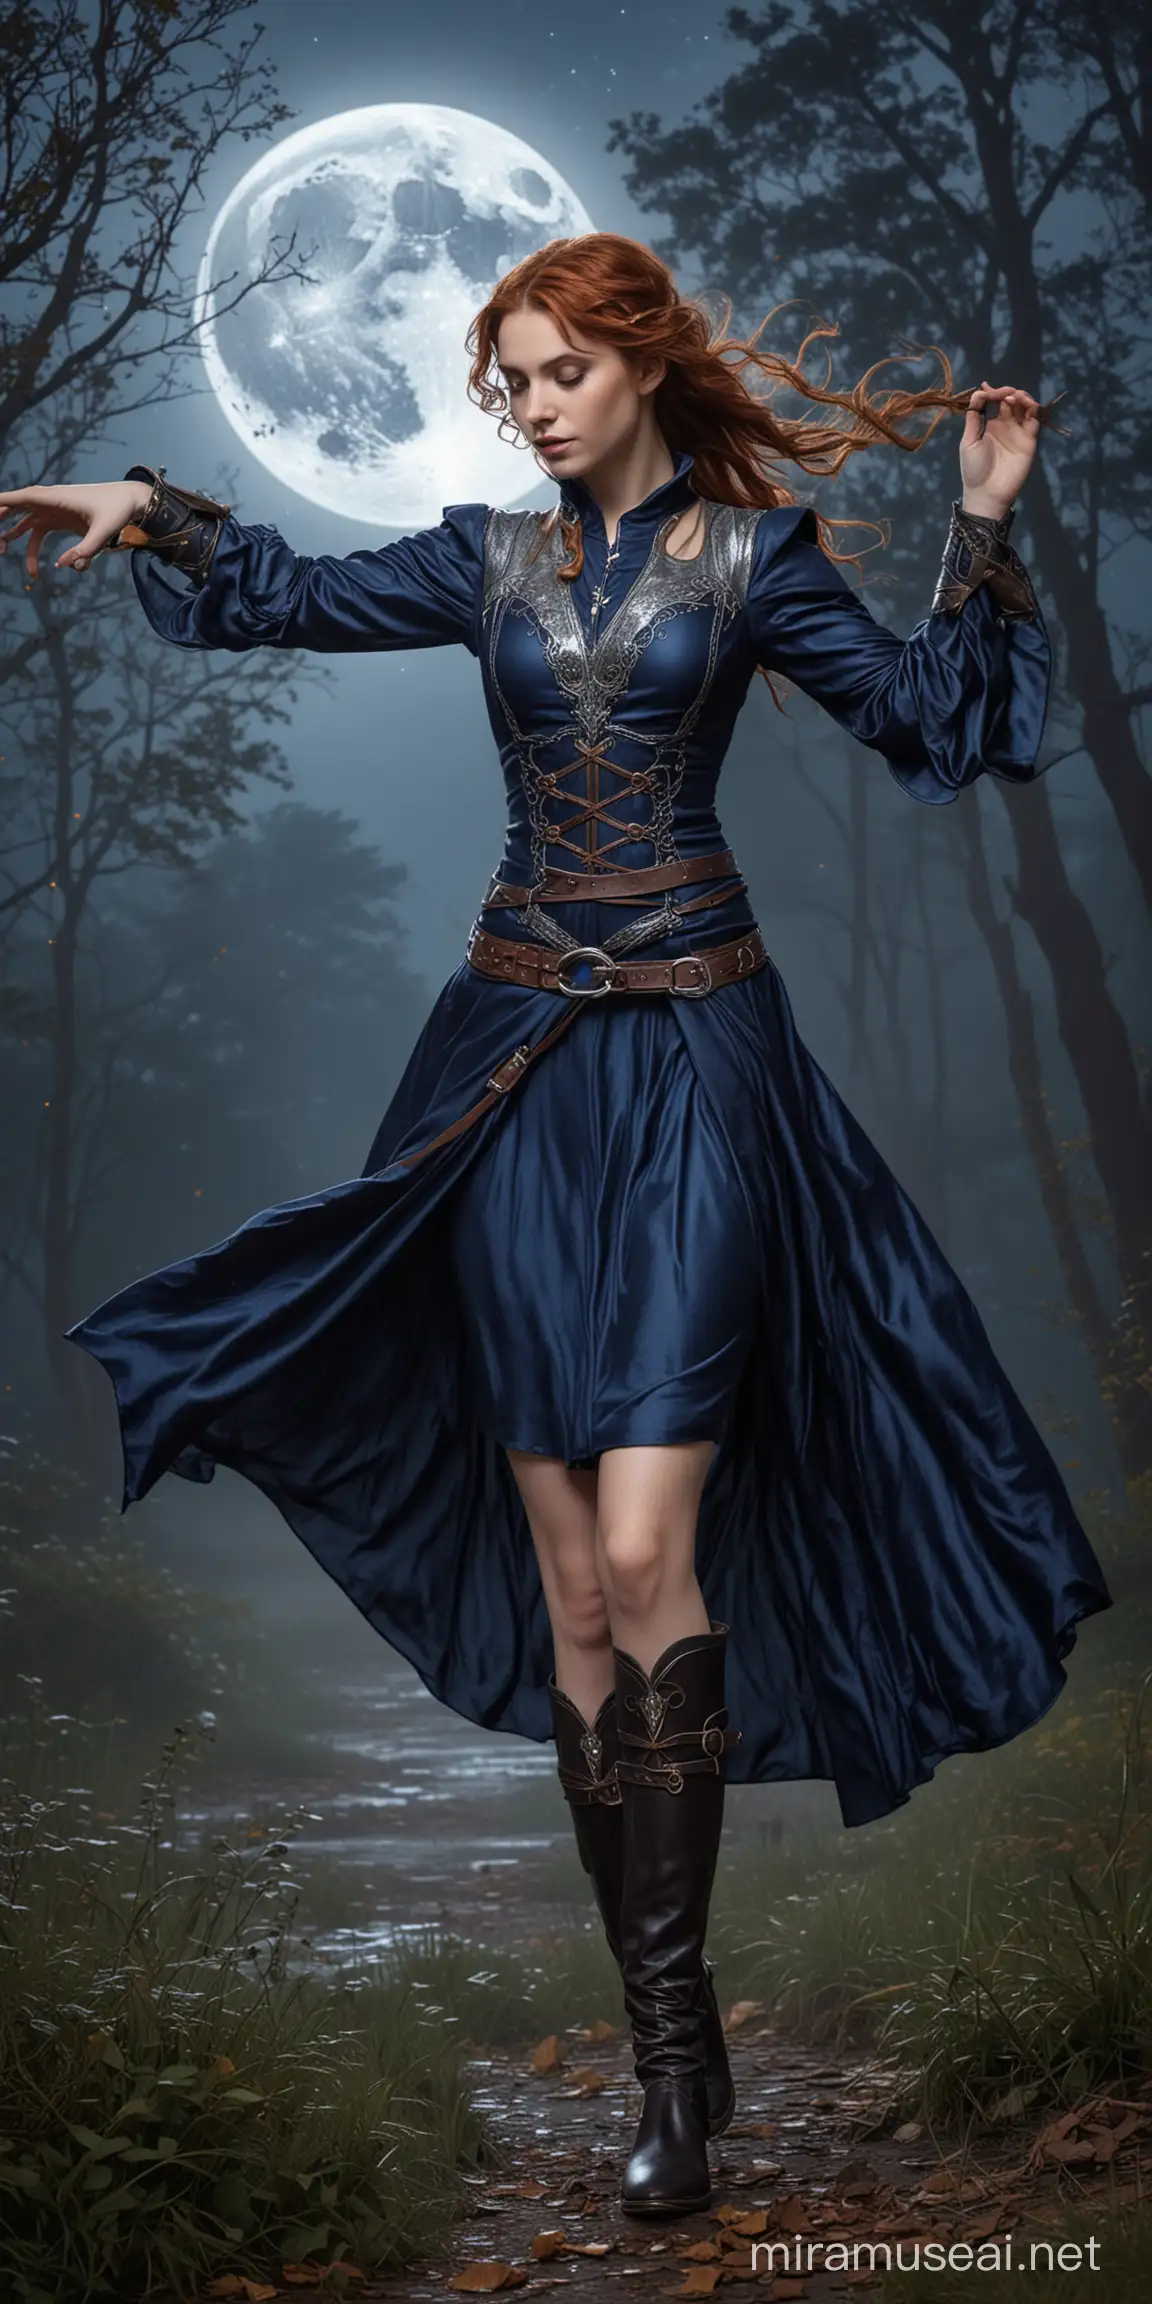 half-elf, fantasy, forgotten realms, wiry, small frame, auburn hair, dancer, fine courtly dark blue covering dress with silver highlights, fully clothed, fine flat leather boots, full moon night